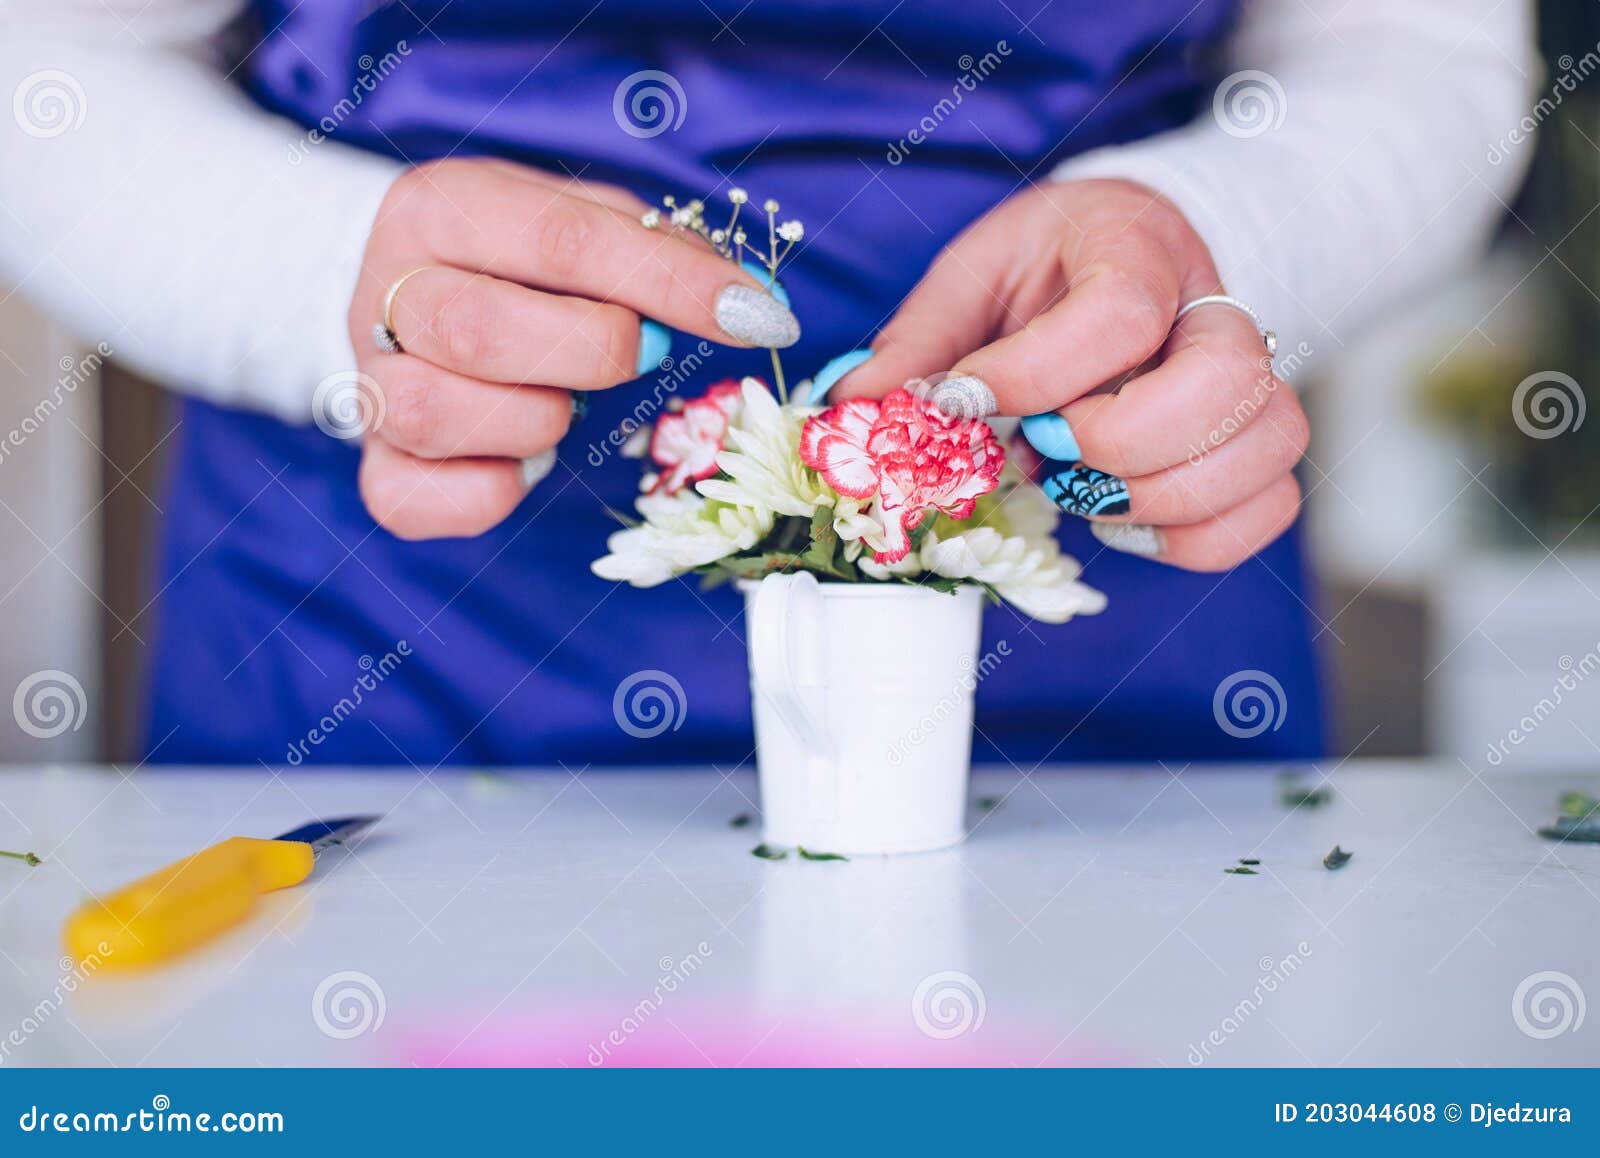 the florist hands creates a composition of flowers in a small white pot.